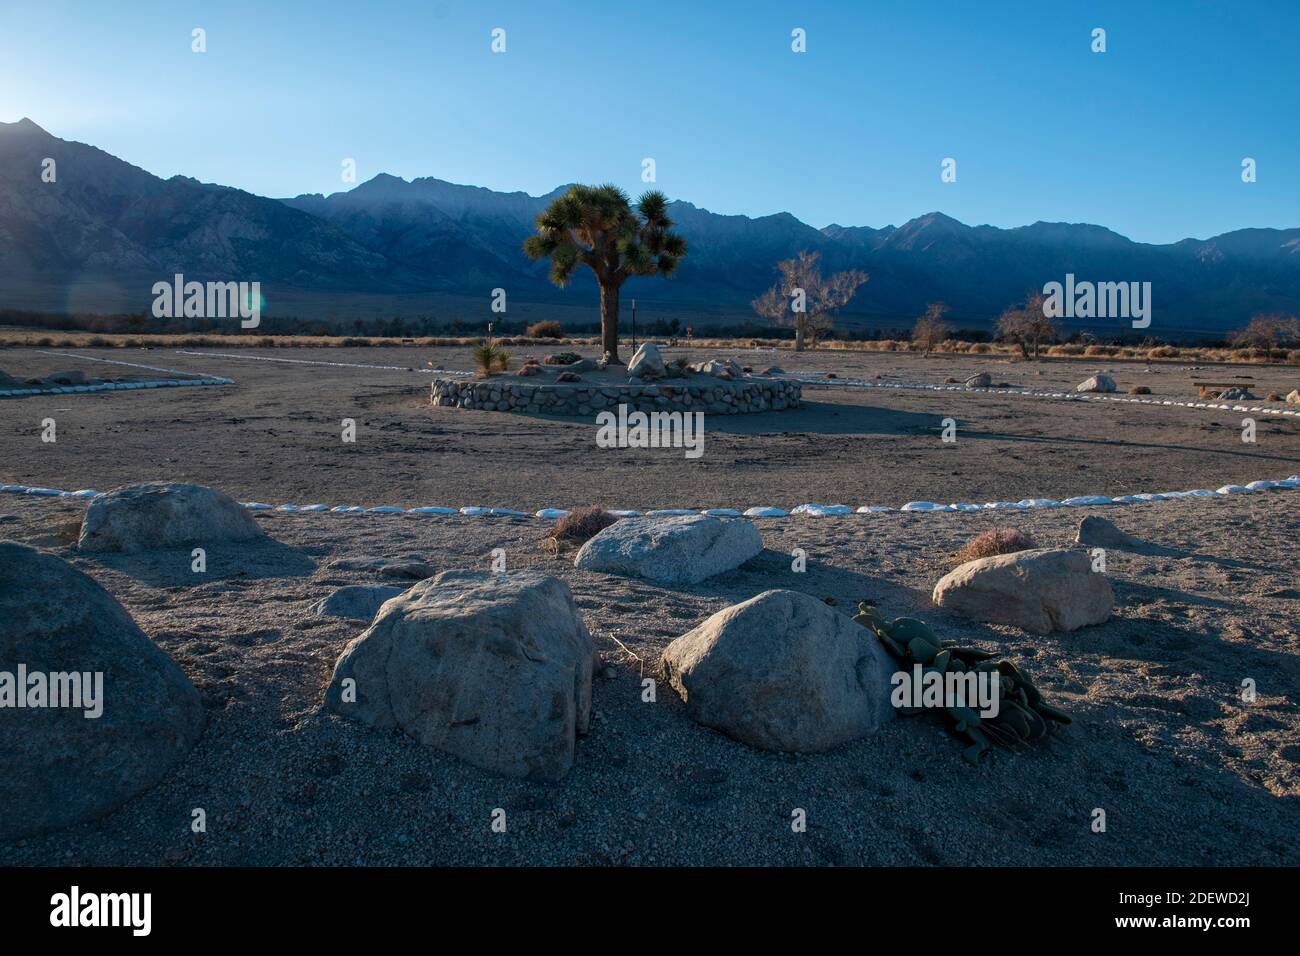 The Manzanar War Relocation Center was an internment camp for Japanese citizens in World War II. It's in the Eastern Sierras of Inyo County, CA. Stock Photo